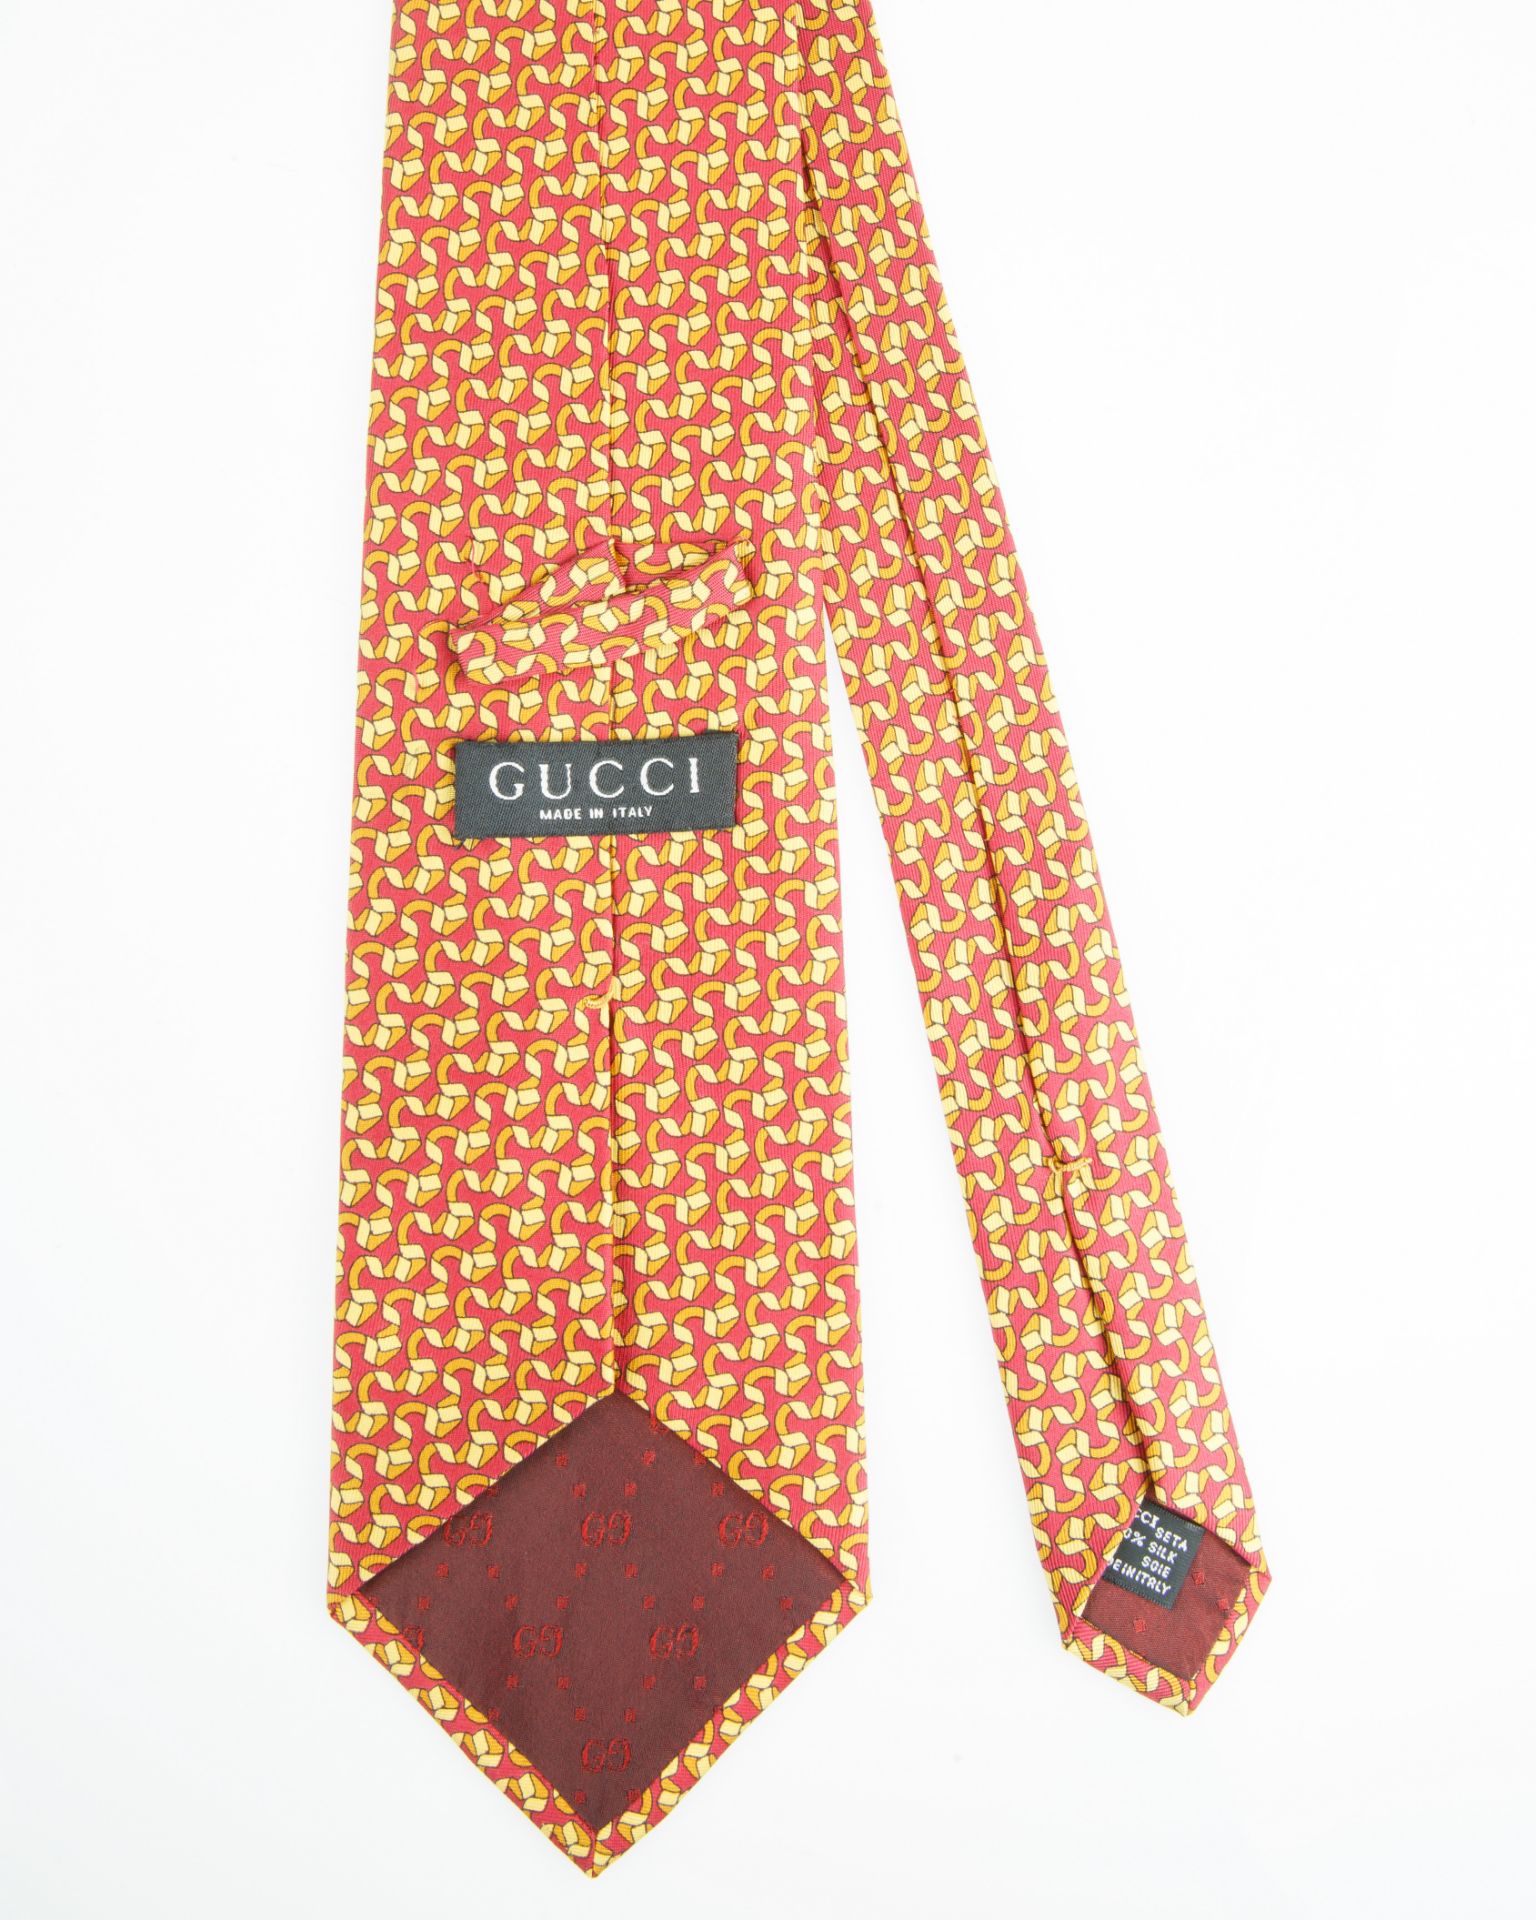 GROUP OF SEVEN GUCCI TIES - Image 9 of 15